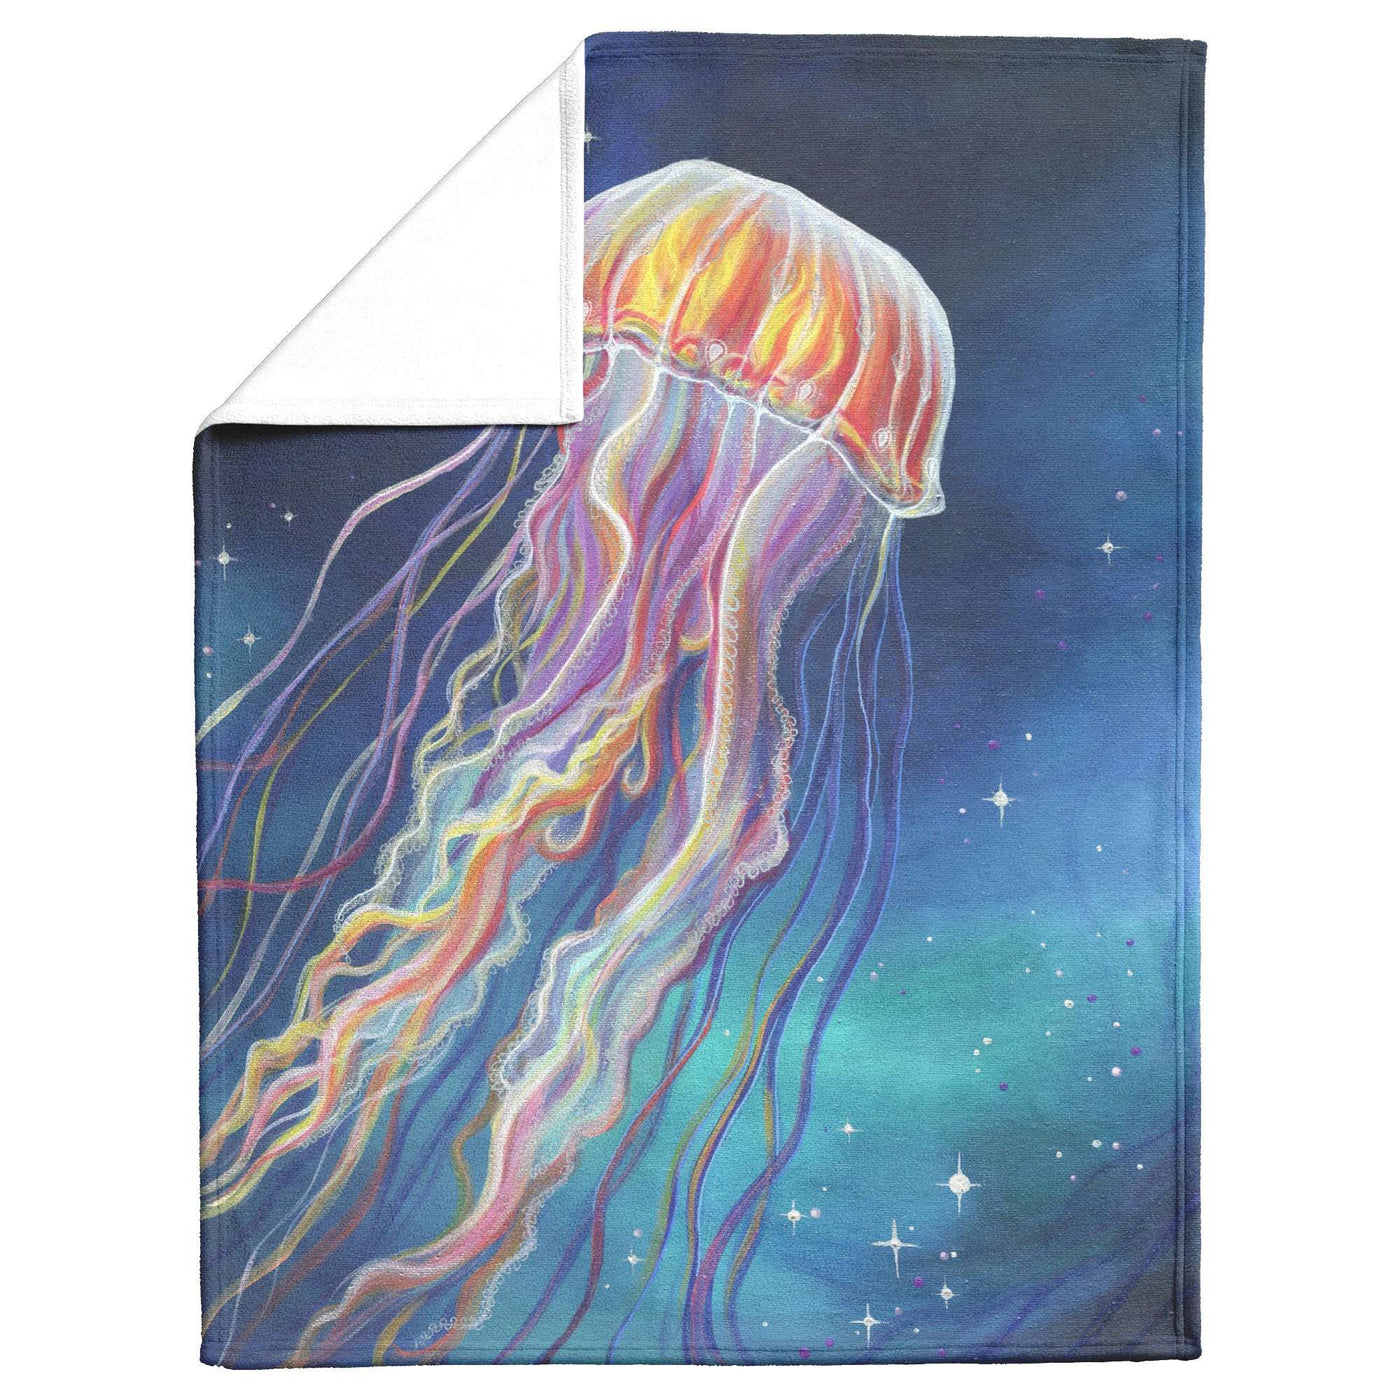 A colorful Jellyfish Blanket featuring a vibrant illustration of a jellyfish against a starry background, partially folded to reveal a white inner side.